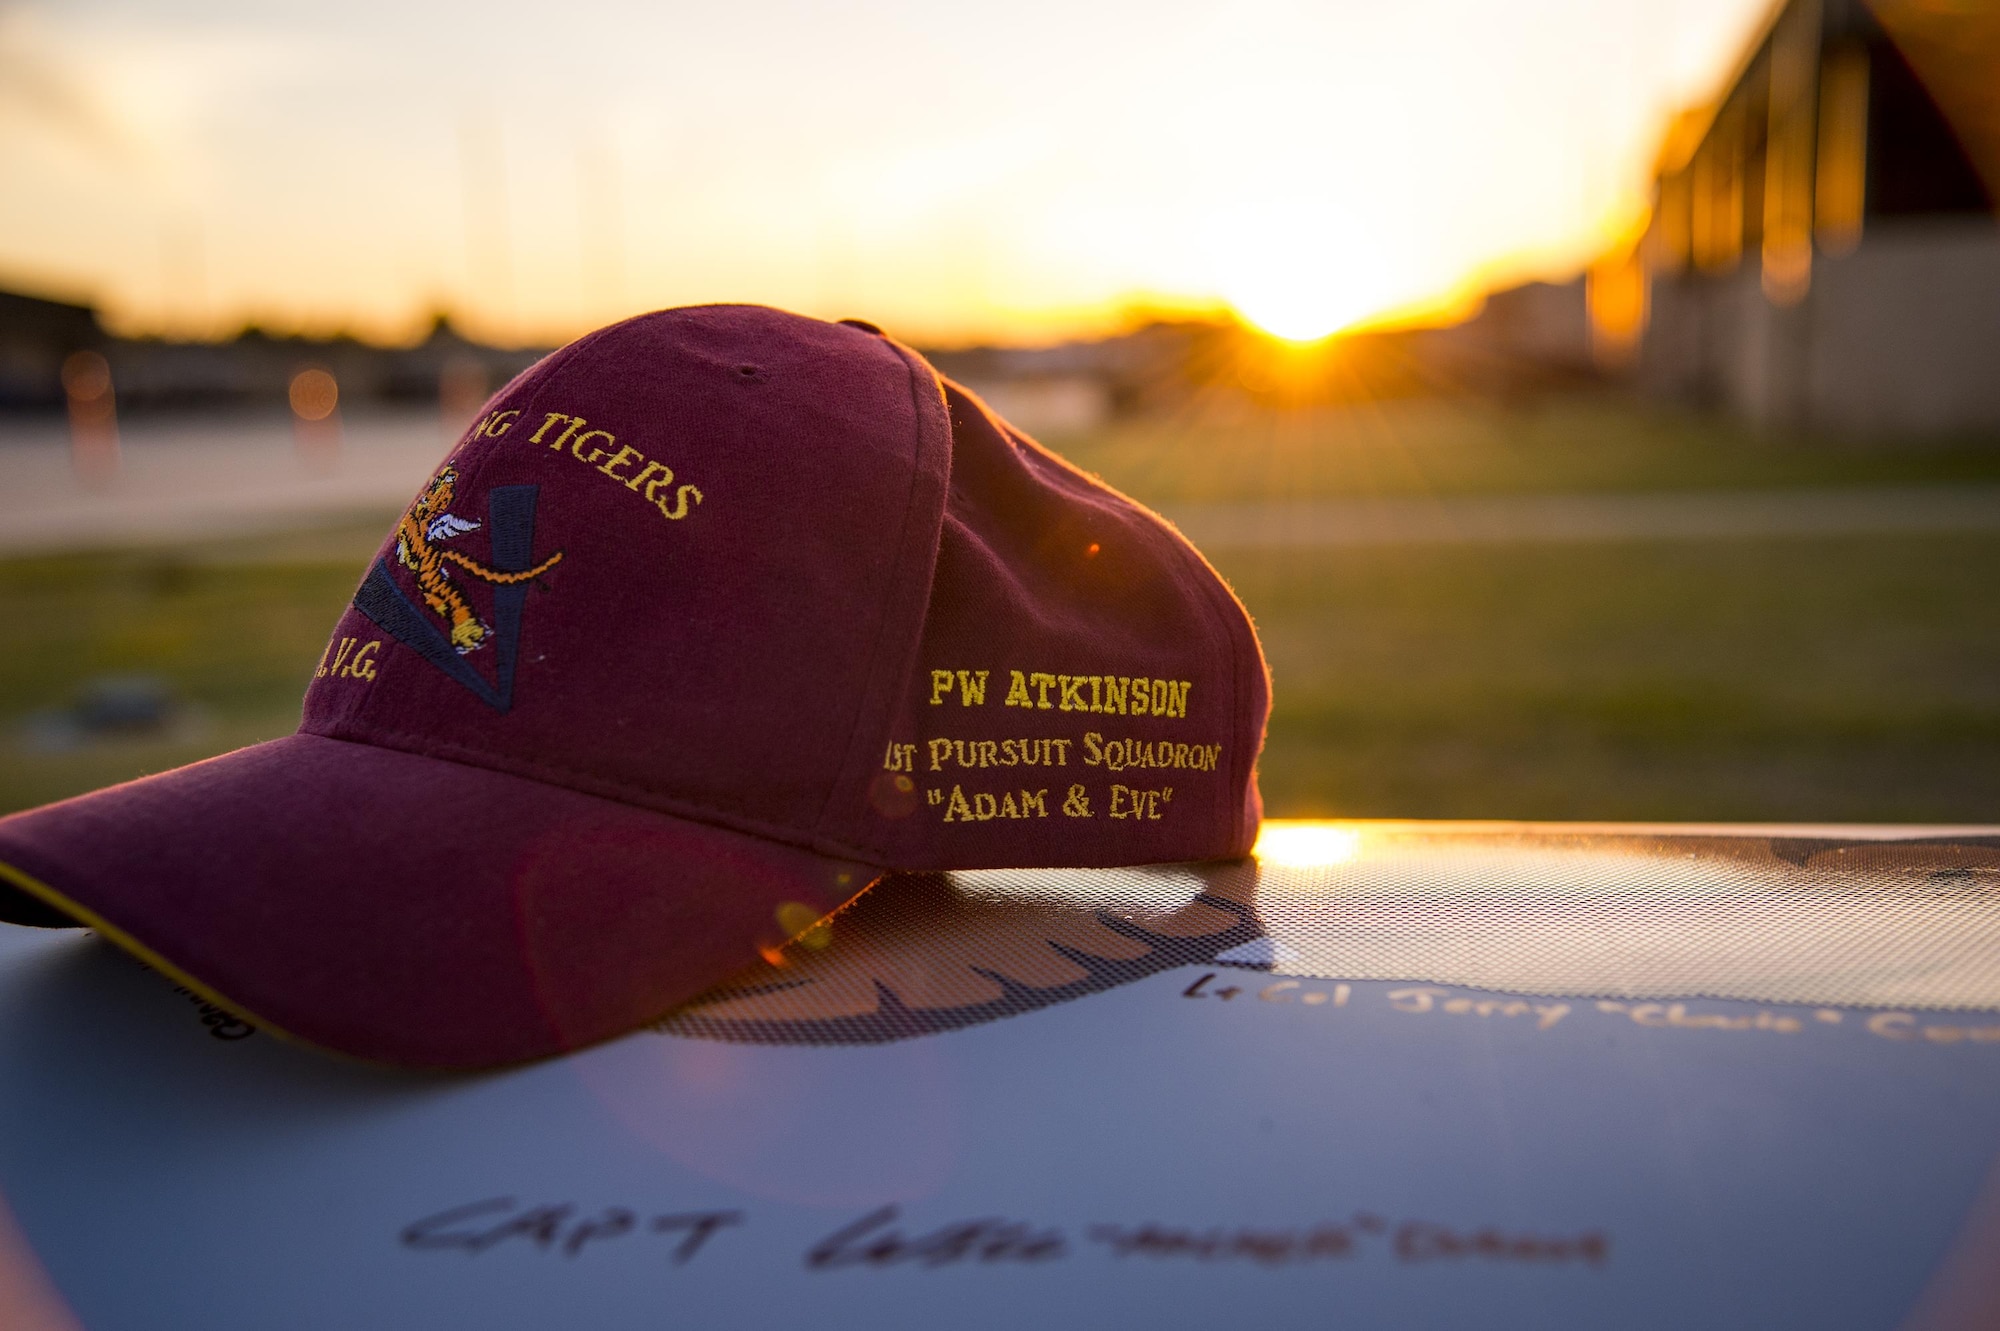 A hat adorned with the name and squadron of a deceased American Volunteer Group member rests on a decorative A-10C Thunderbolt II engine cover during the 75th Anniversary Flying Tiger Reunion, March 10, 2017, at Moody Air Force Base, Ga. In 1941, President Roosevelt signed an executive order forming the American Volunteer Group. The AVG was organized into the 1st, 2nd, and 3rd Pursuit Squadrons and later disbanded and replaced by the 23d Fighter Group in 1942. Under the command of Gen. Claire Chennault, the Flying Tigers comprised of the 74th, 75th, and 76th Pursuit Squadrons defended China against the Japanese. Throughout World War II, the Flying Tigers achieved combat success and flew the US-made Curtiss P-40 Warhawks painted with the shark-mouth design. (U.S. Air Force photo by Andrea Jenkins)